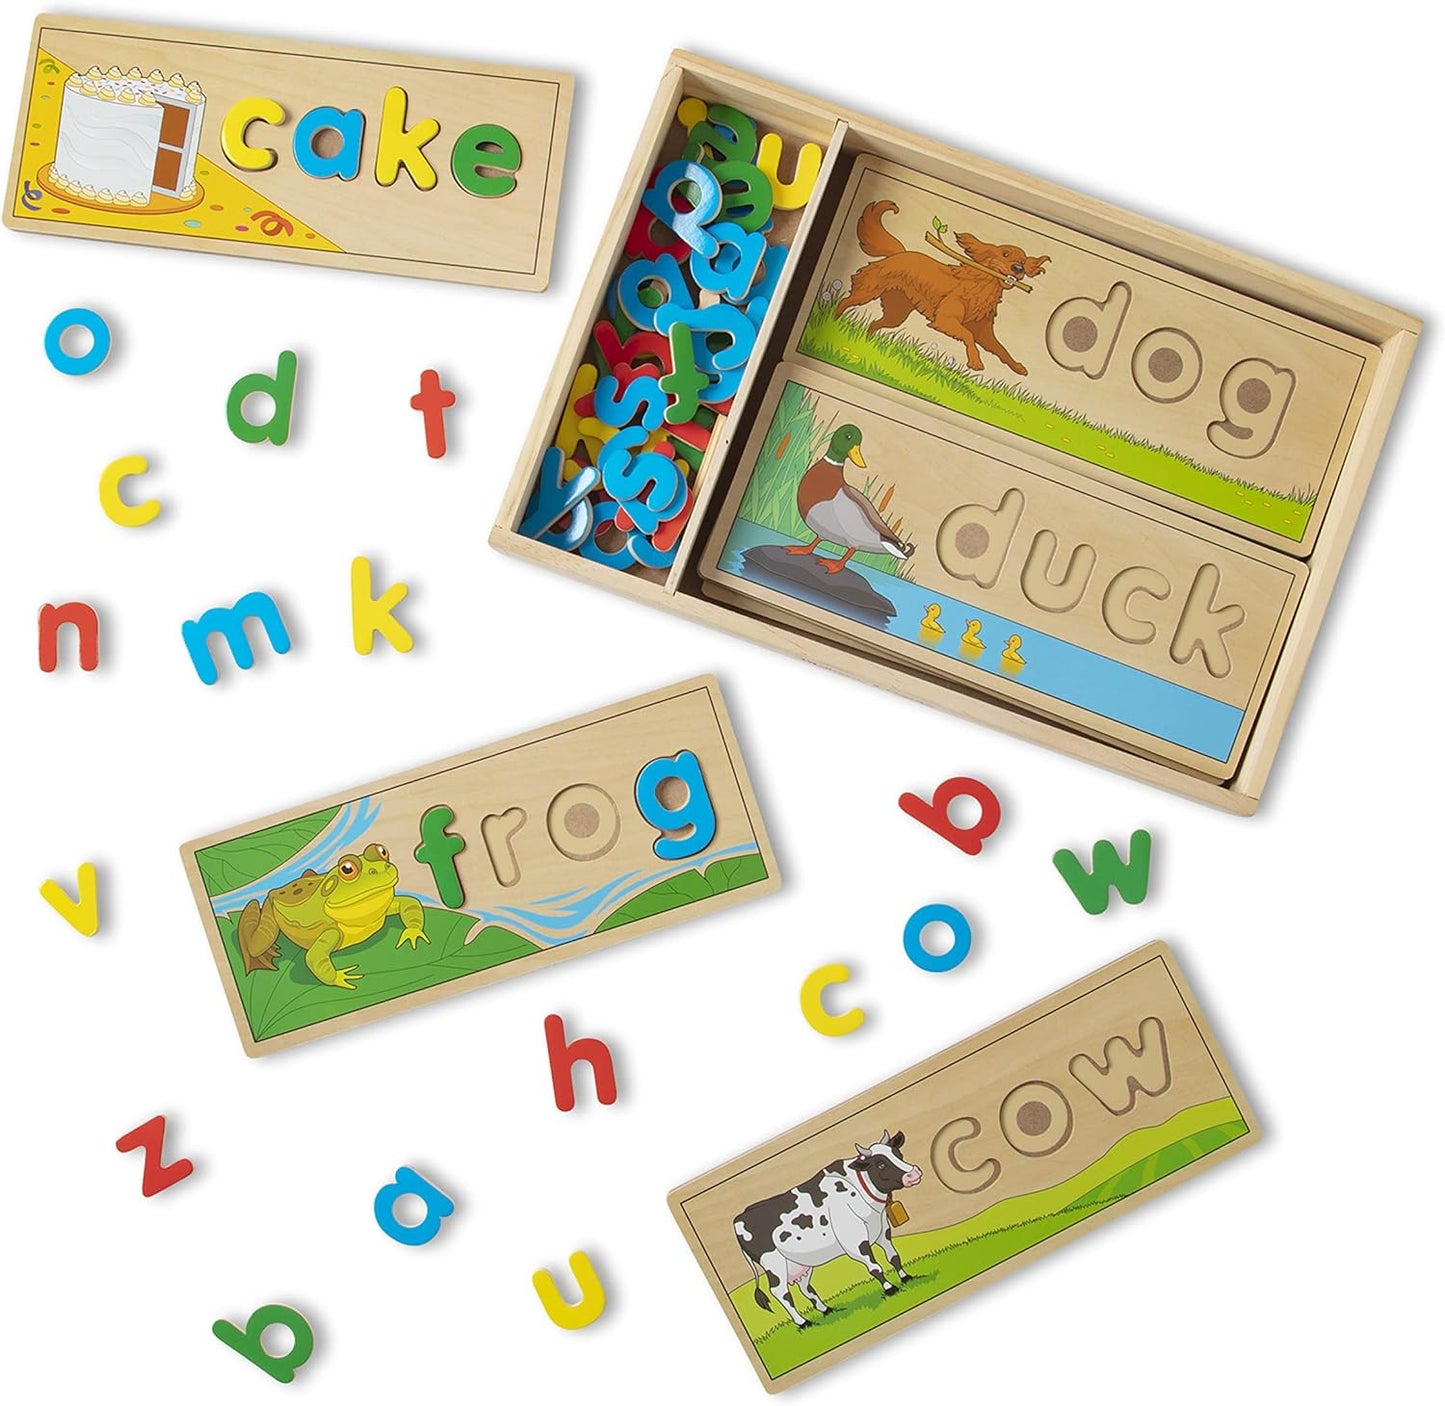 Melissa & Doug See & Spell Wooden Educational Toy With 8 Double-Sided Spelling Boards and 64 Letters - Preschool Learning Activities, See & Spell Learning Toys For Kids Ages 4+